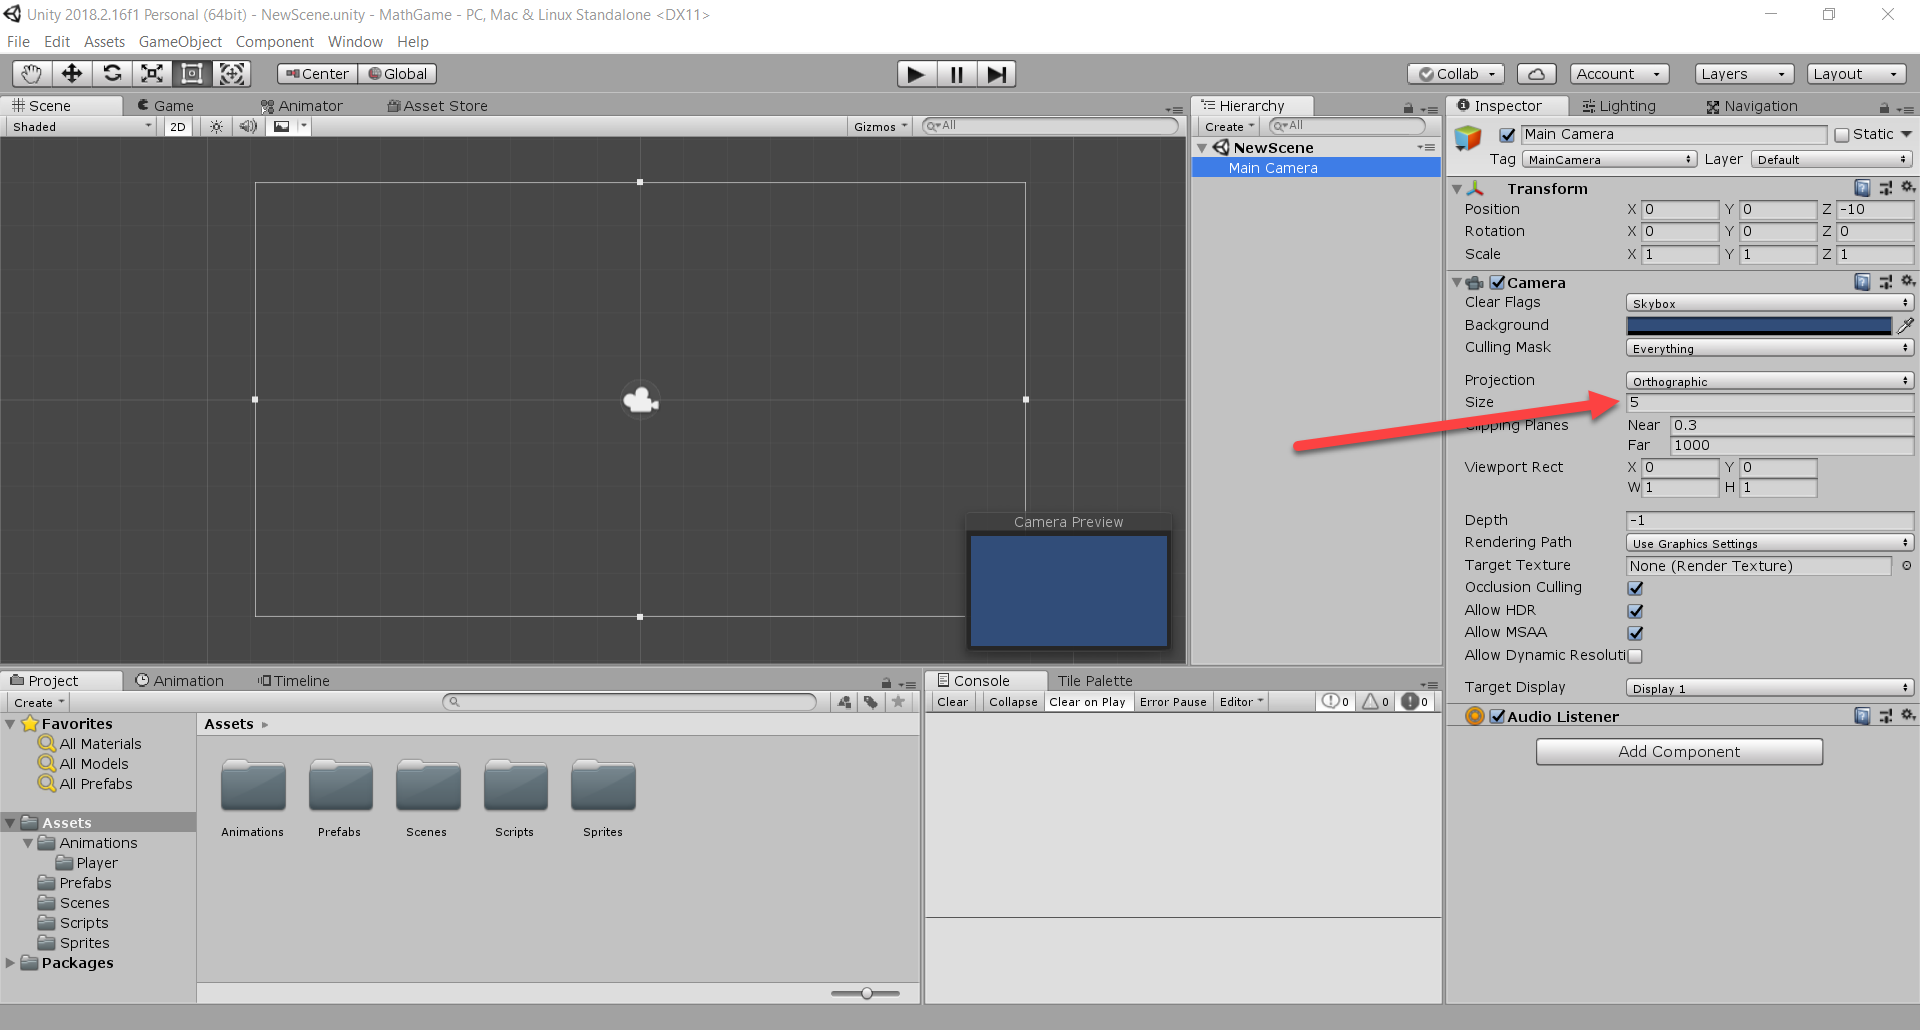 Unity camera options within the Inspector.